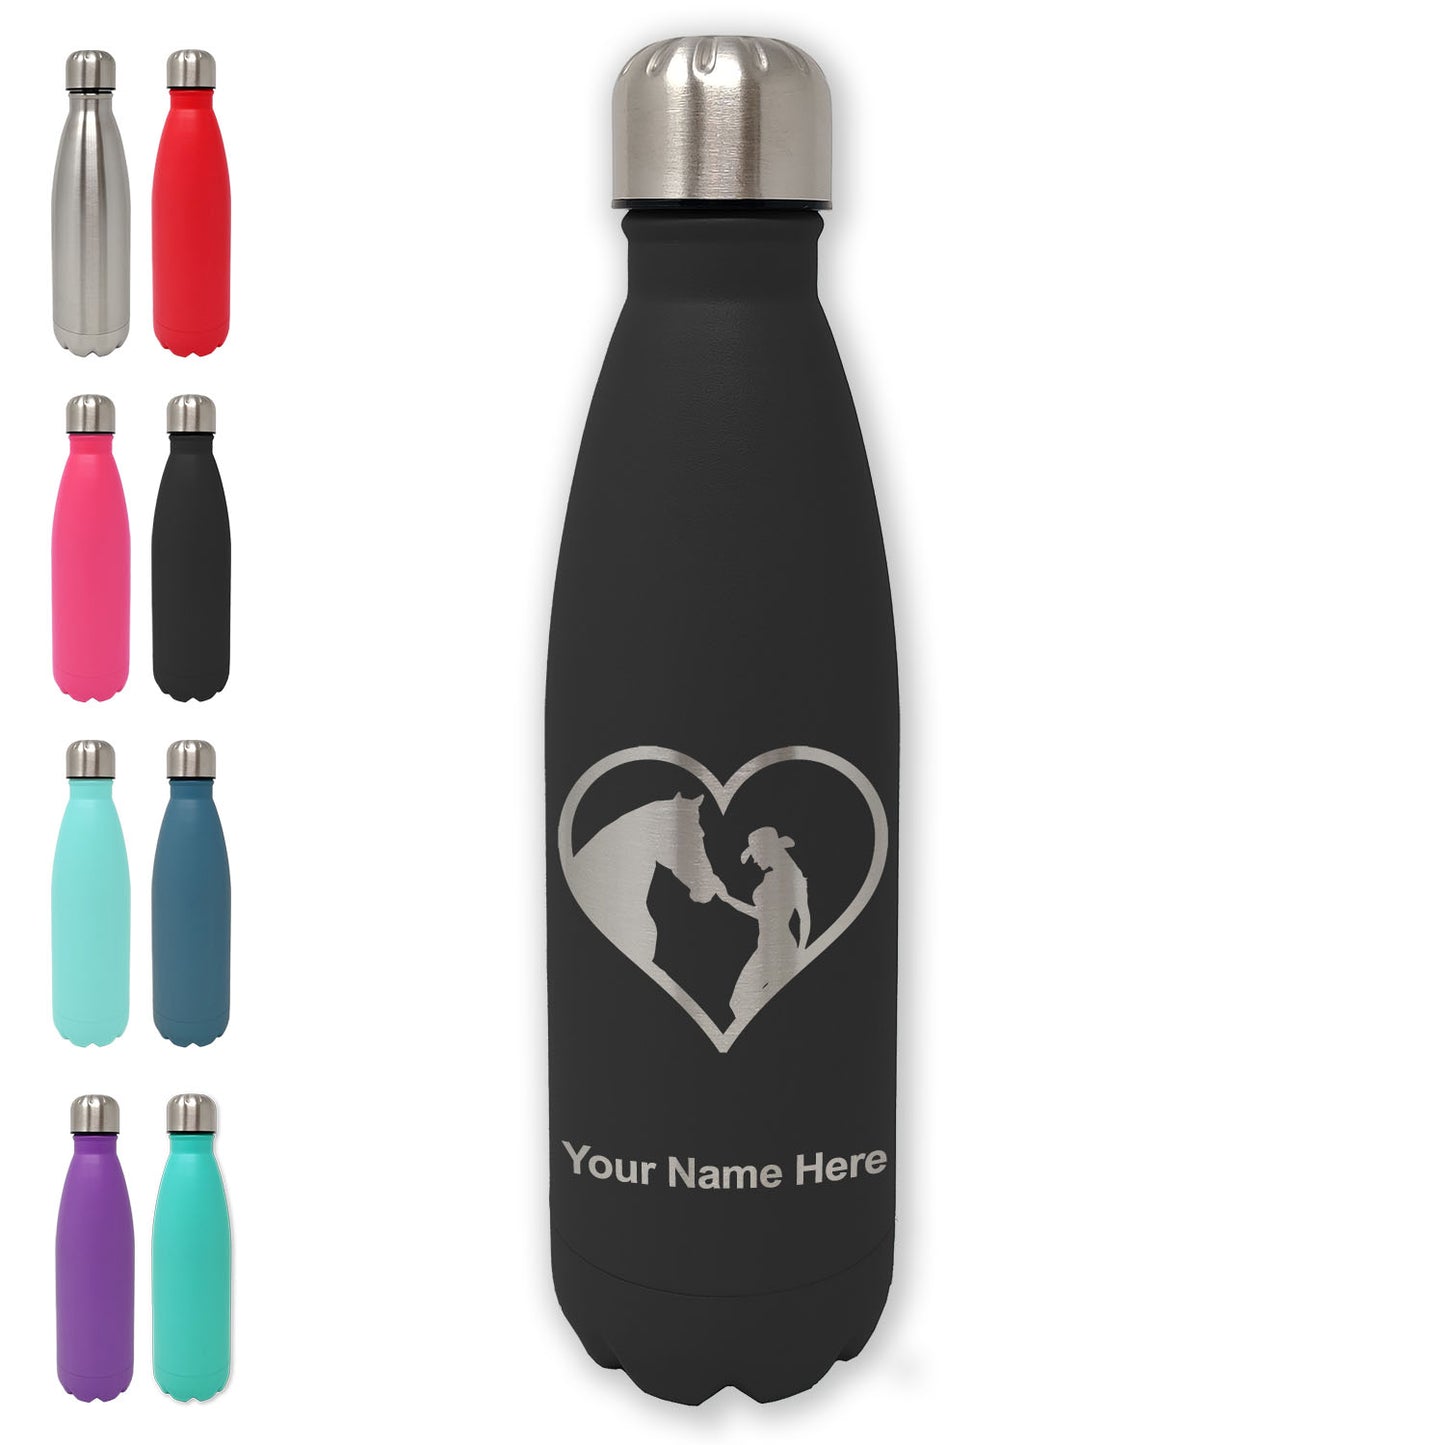 LaserGram Double Wall Water Bottle, Horse Cowgirl Heart, Personalized Engraving Included